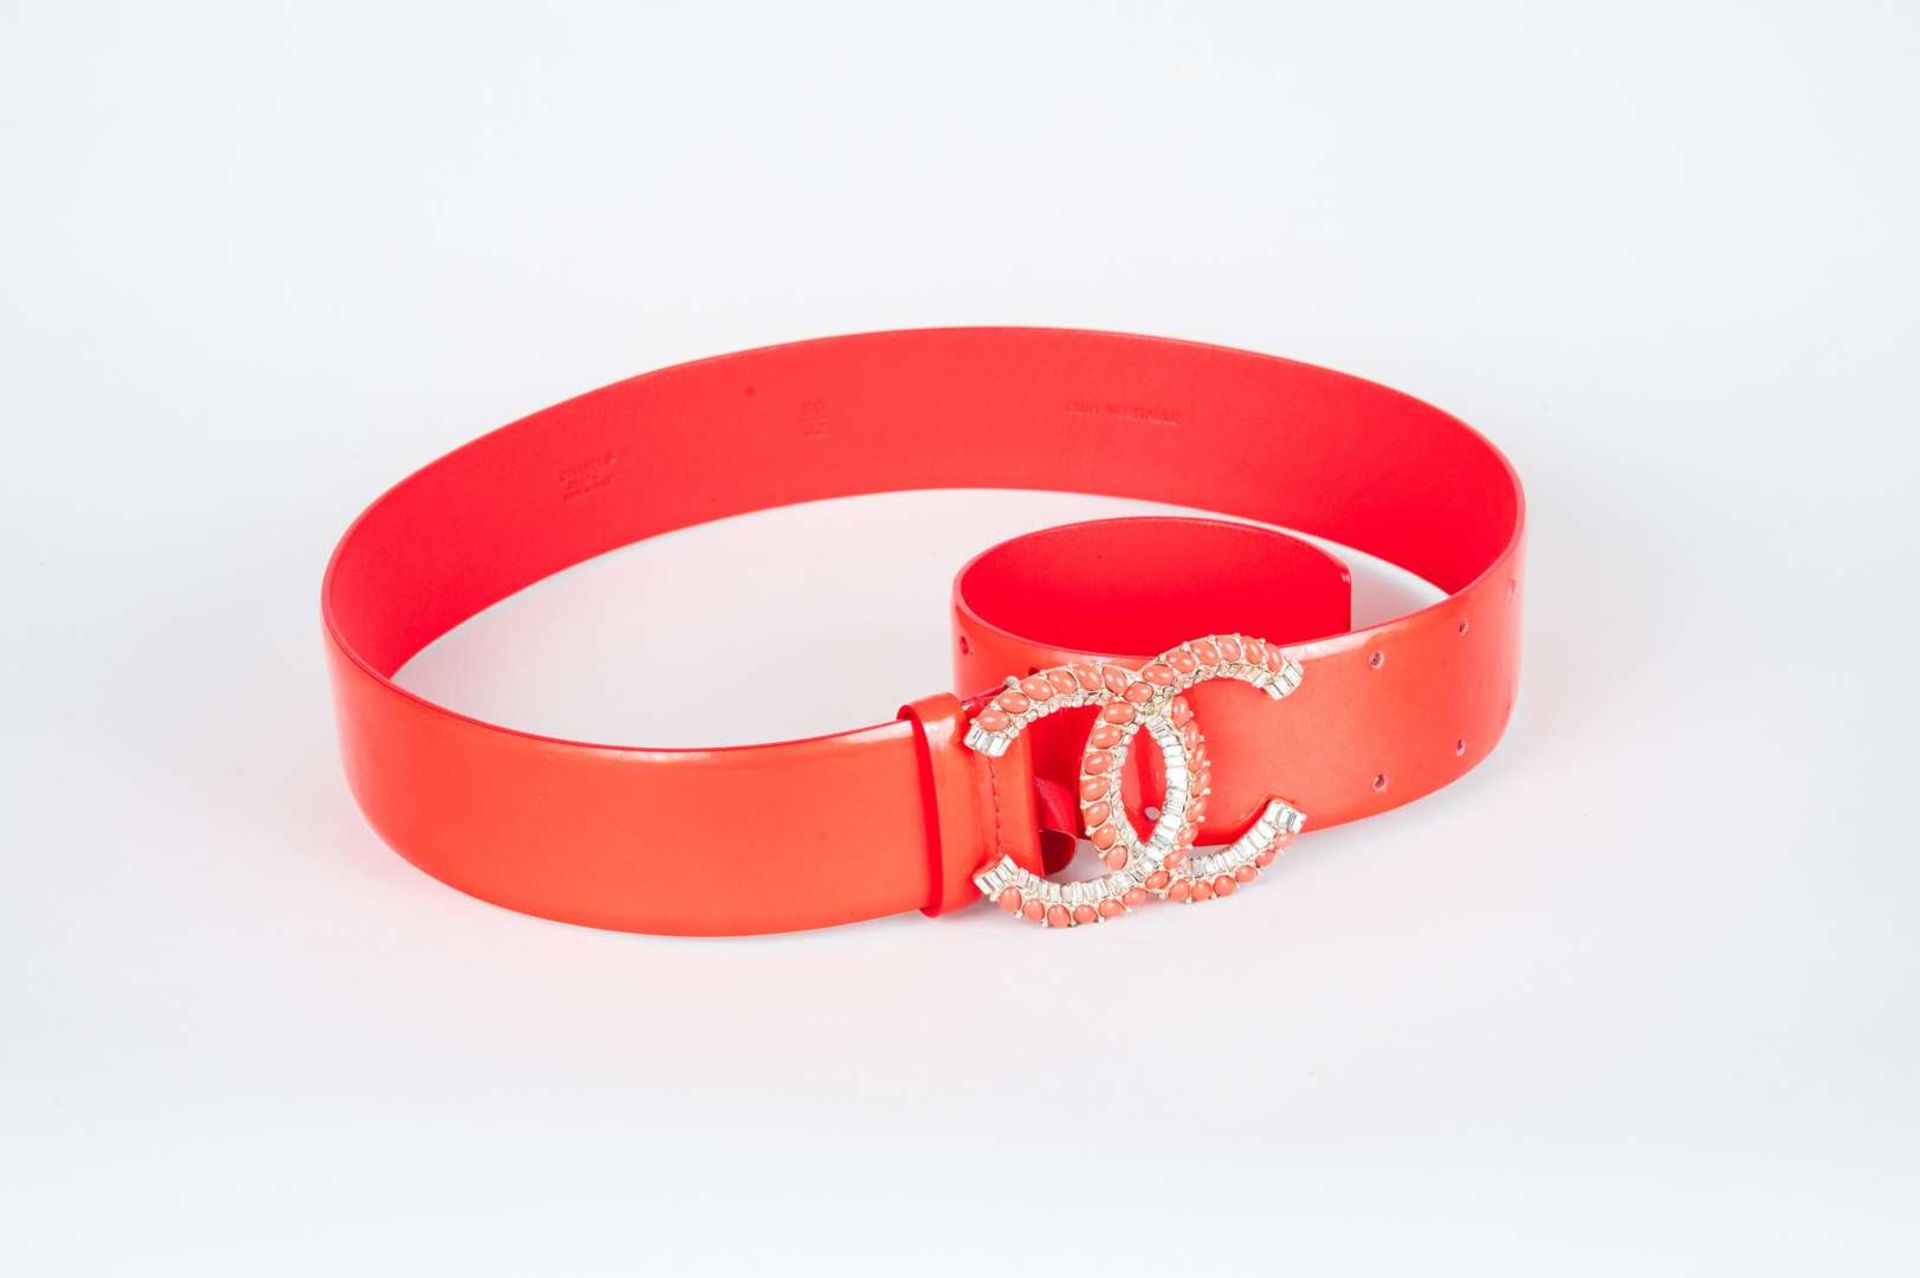 CHANEL, coral red, patent leather belt - Image 4 of 6